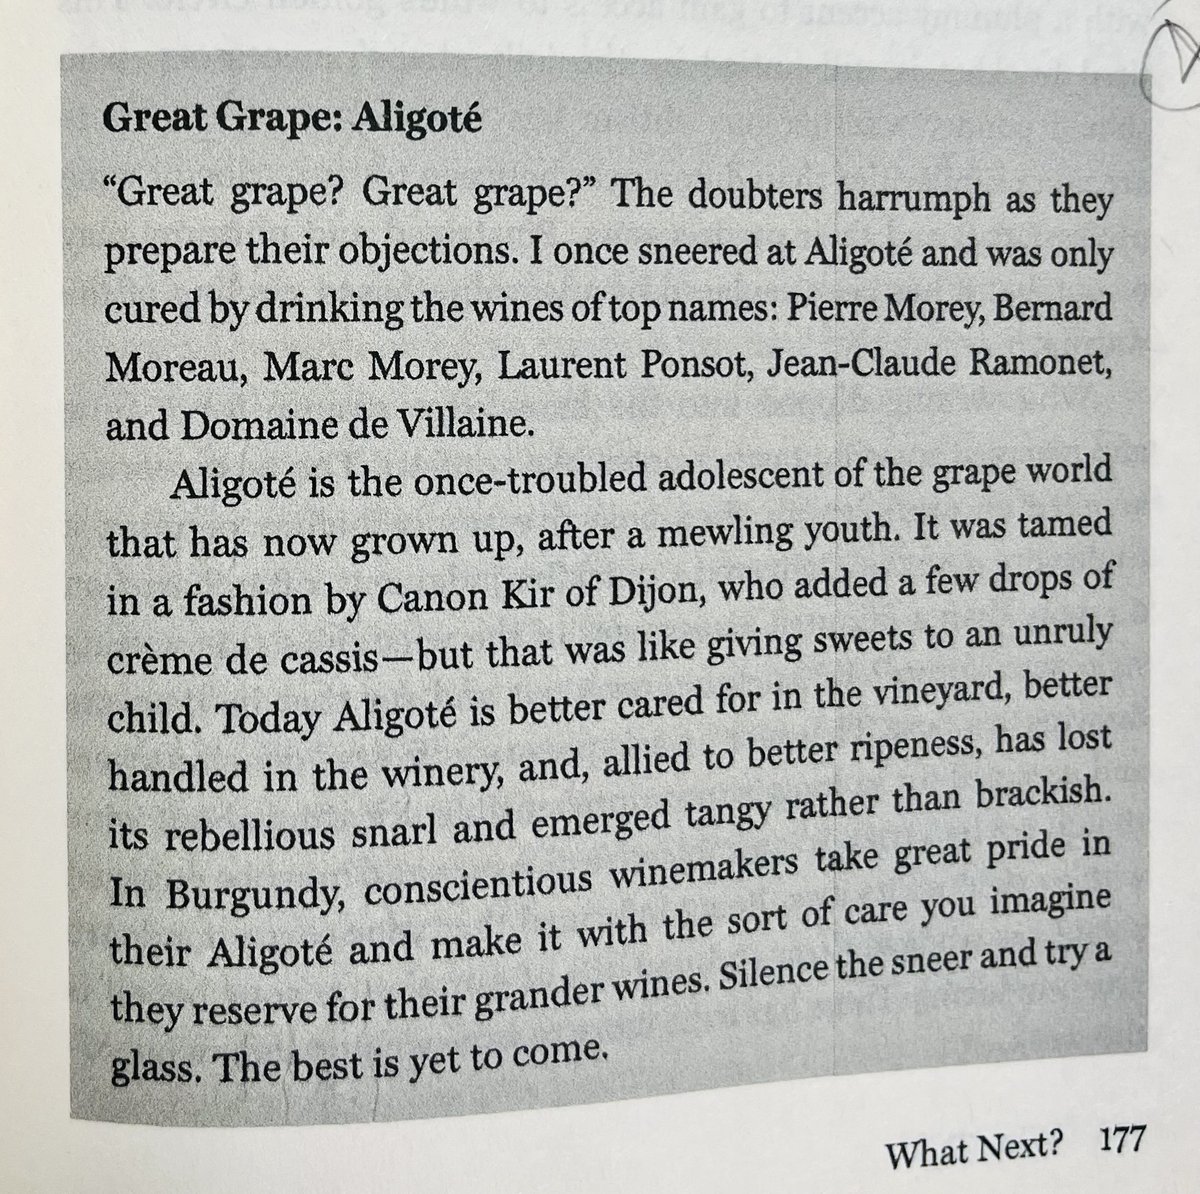 @Solera_Wine @AoifeCarrigy_ @Independent_ie @BaggotStWines @Wineonlineie @IrishFoodGuide @frankstero @McHughsOnline @clontarfwines @mitchellandson @guidofranken71 @Burgundywave Here's my take on Aligoté - from 'Wine Talk' - the snarling adolescent that has now grown up. And, as I say, the best is yet to come. And it can age too - especially Ponsot's Monts Luisants 1er cru.